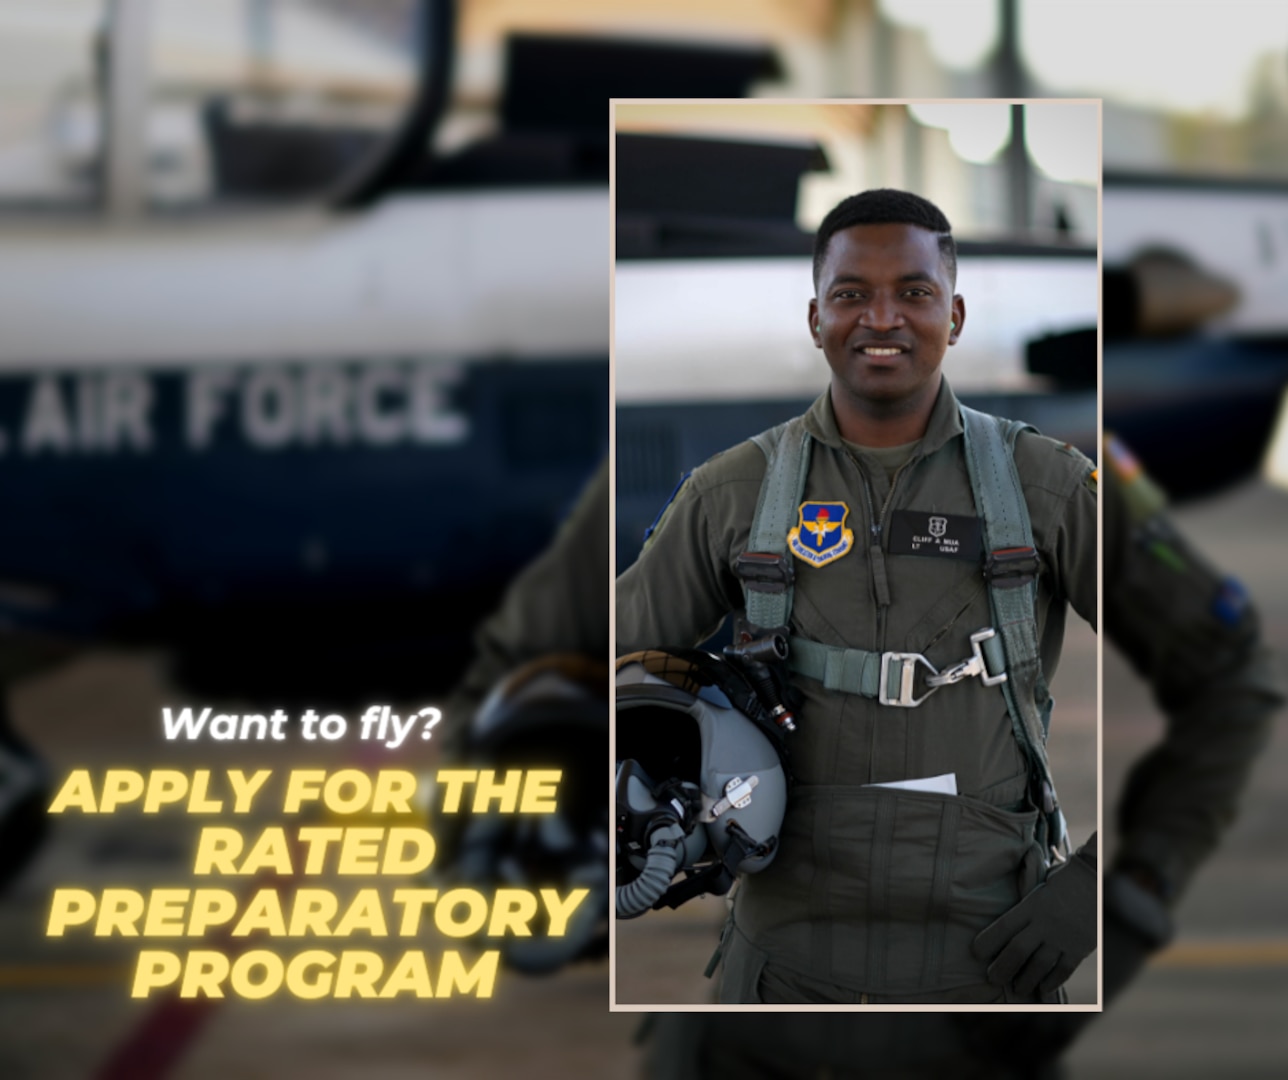 Pilot - Requirements and Benefits - U.S. Air Force